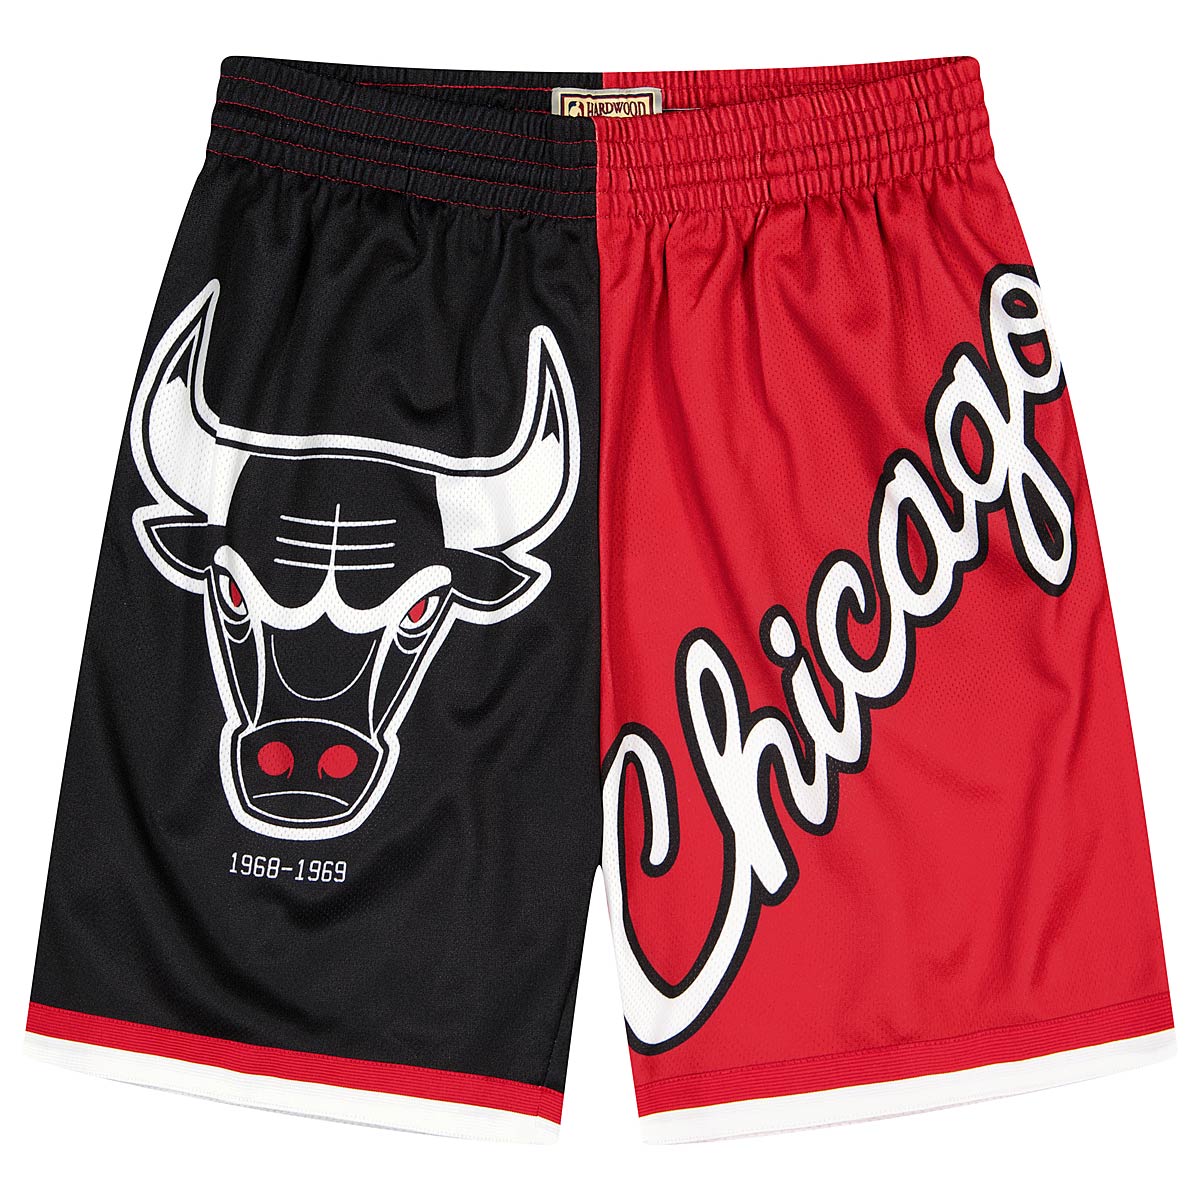 NBA Chicago Bulls Women's Cycling Shorts, Medium : Buy Online at Best Price  in KSA - Souq is now : Sporting Goods